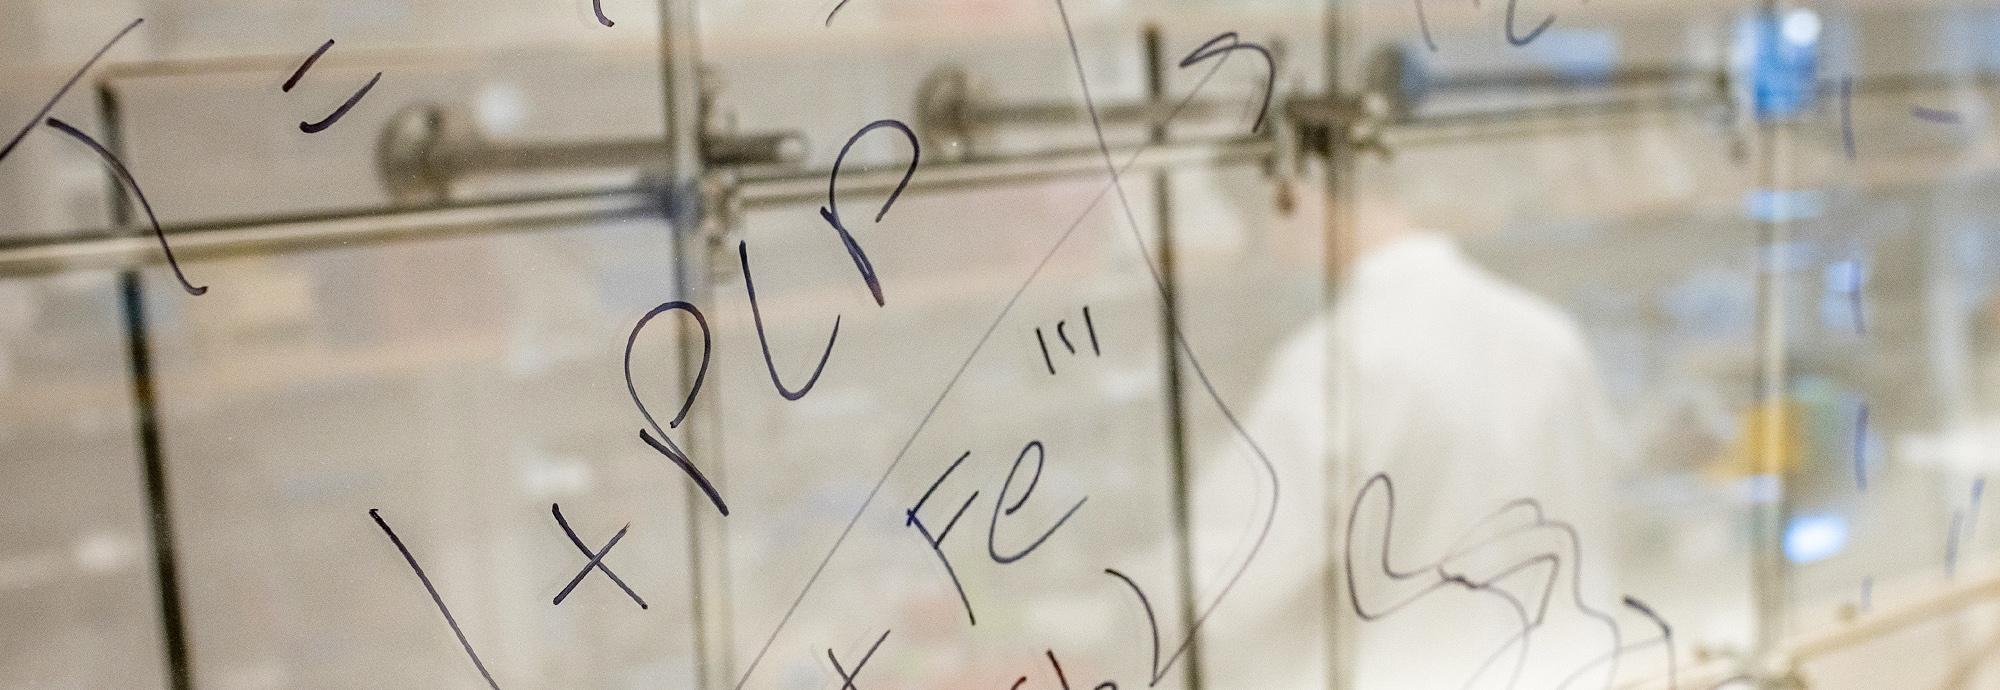 Writing on a whiteboard that is reflecting a person in a lab